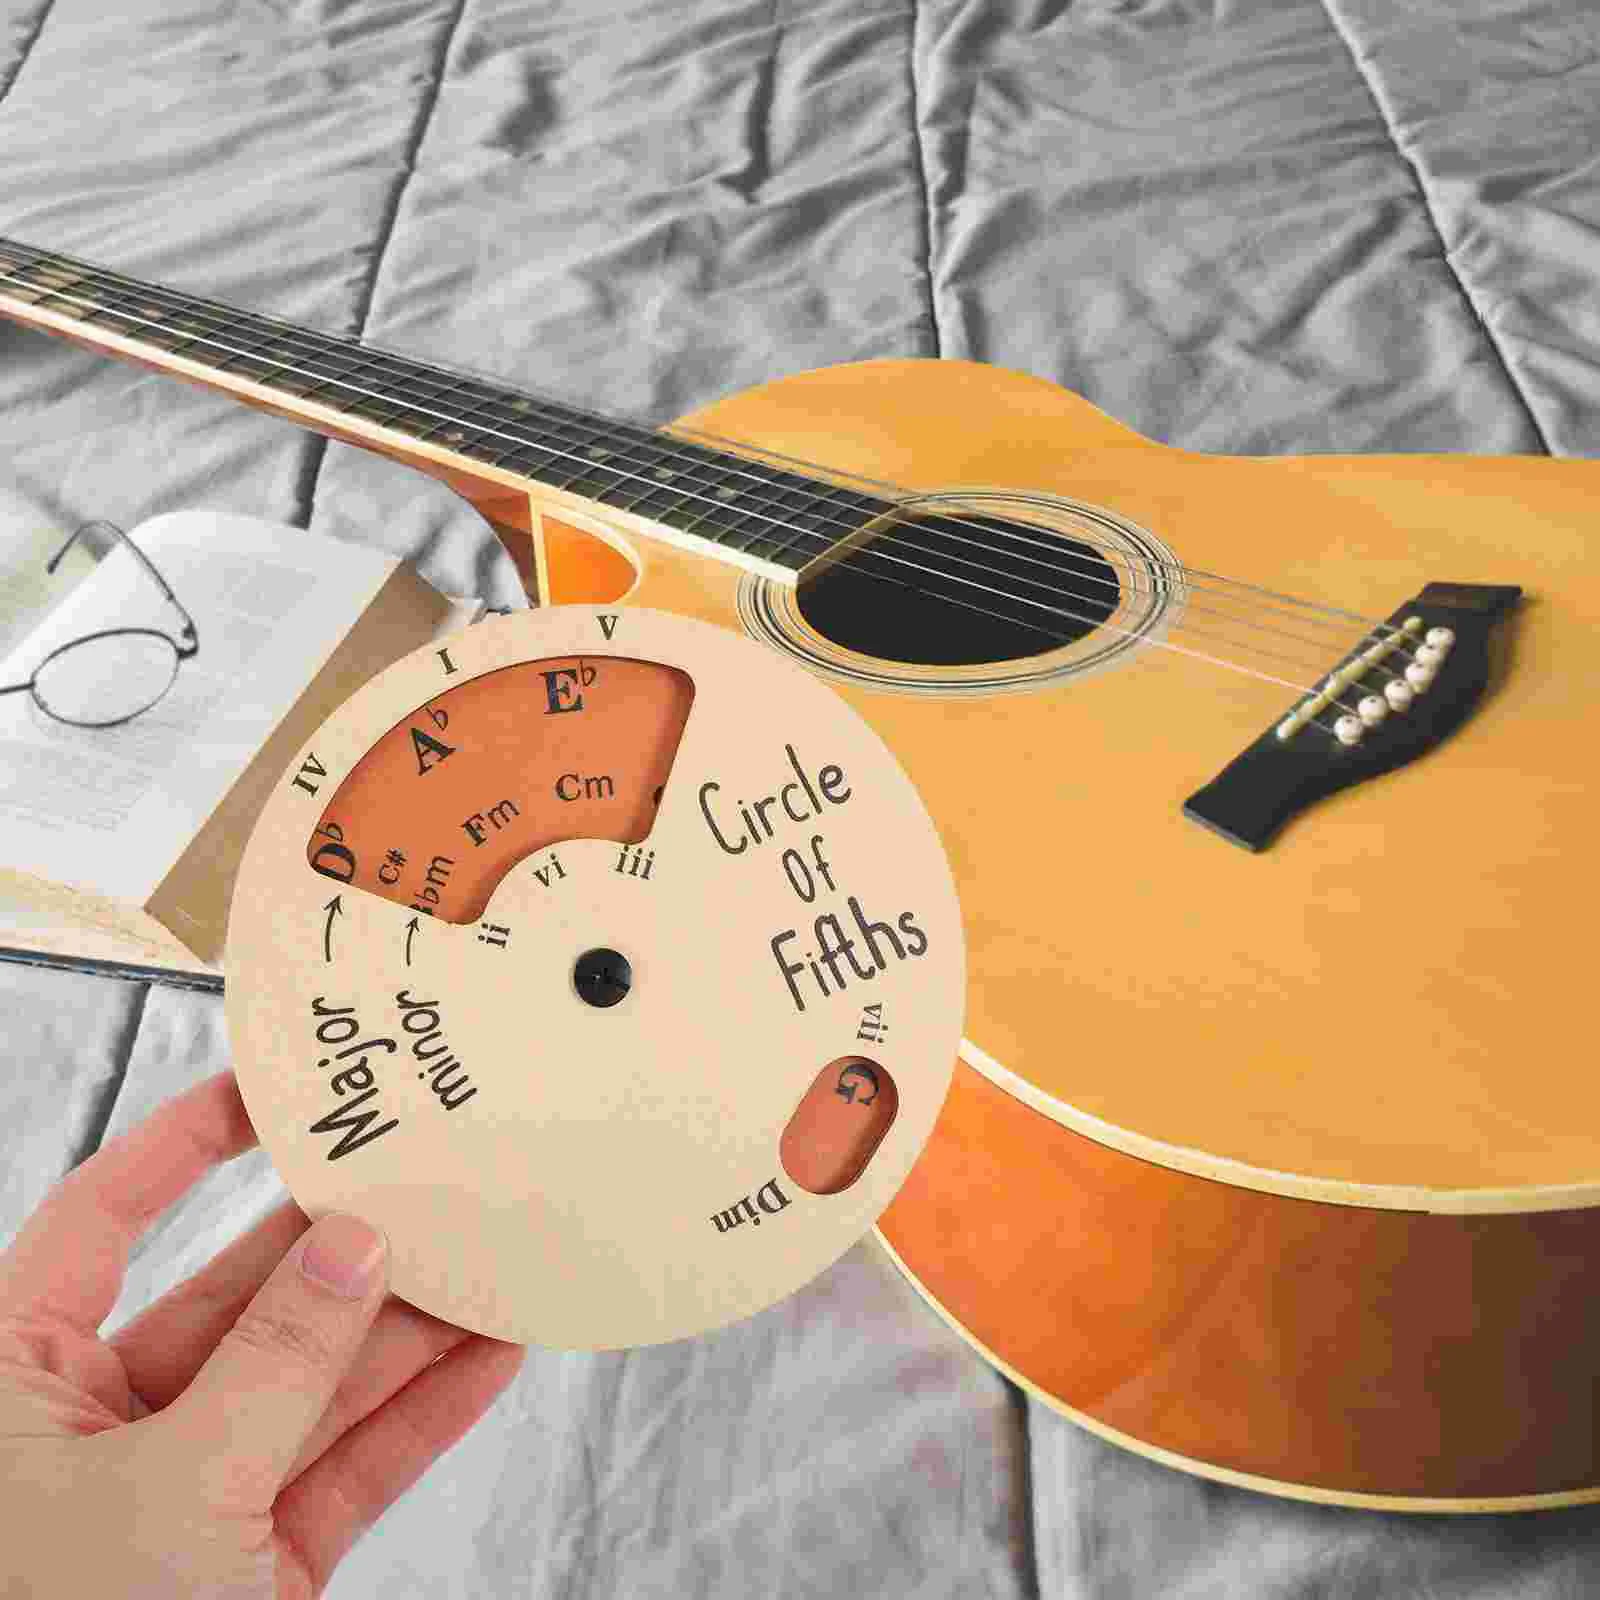 

Wooden Melody Tool Music Theory Chord Wheel Circle of Fifths Musical Instrument General Guitar Accessories